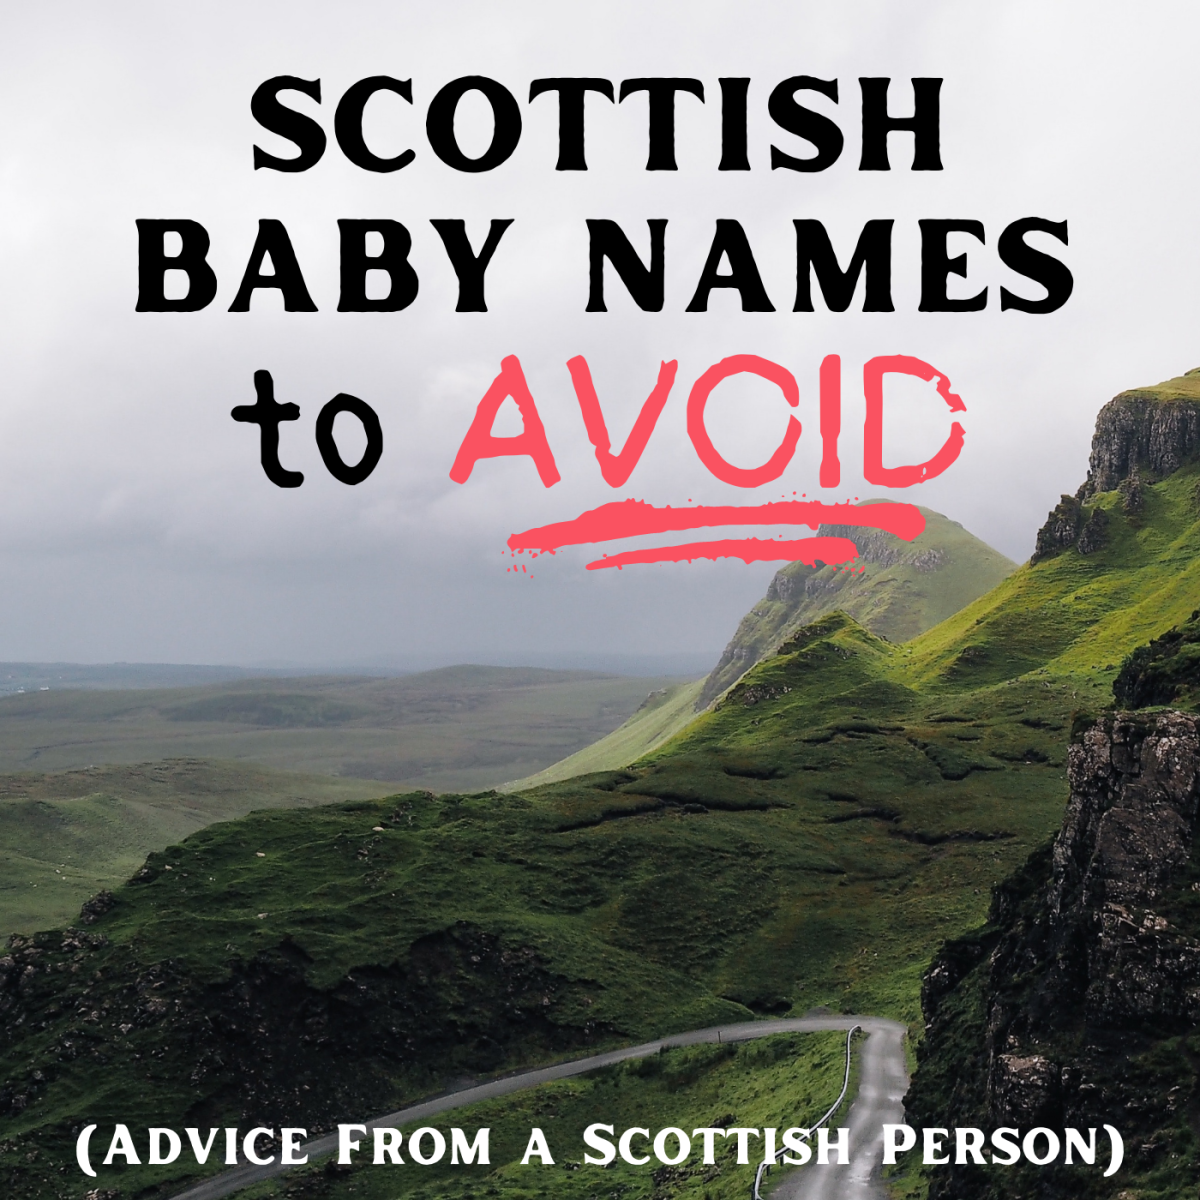 Take a somewhat tongue-in-cheek look at some Scottish baby names that I, as a person from Scotland, do not recommend choosing.